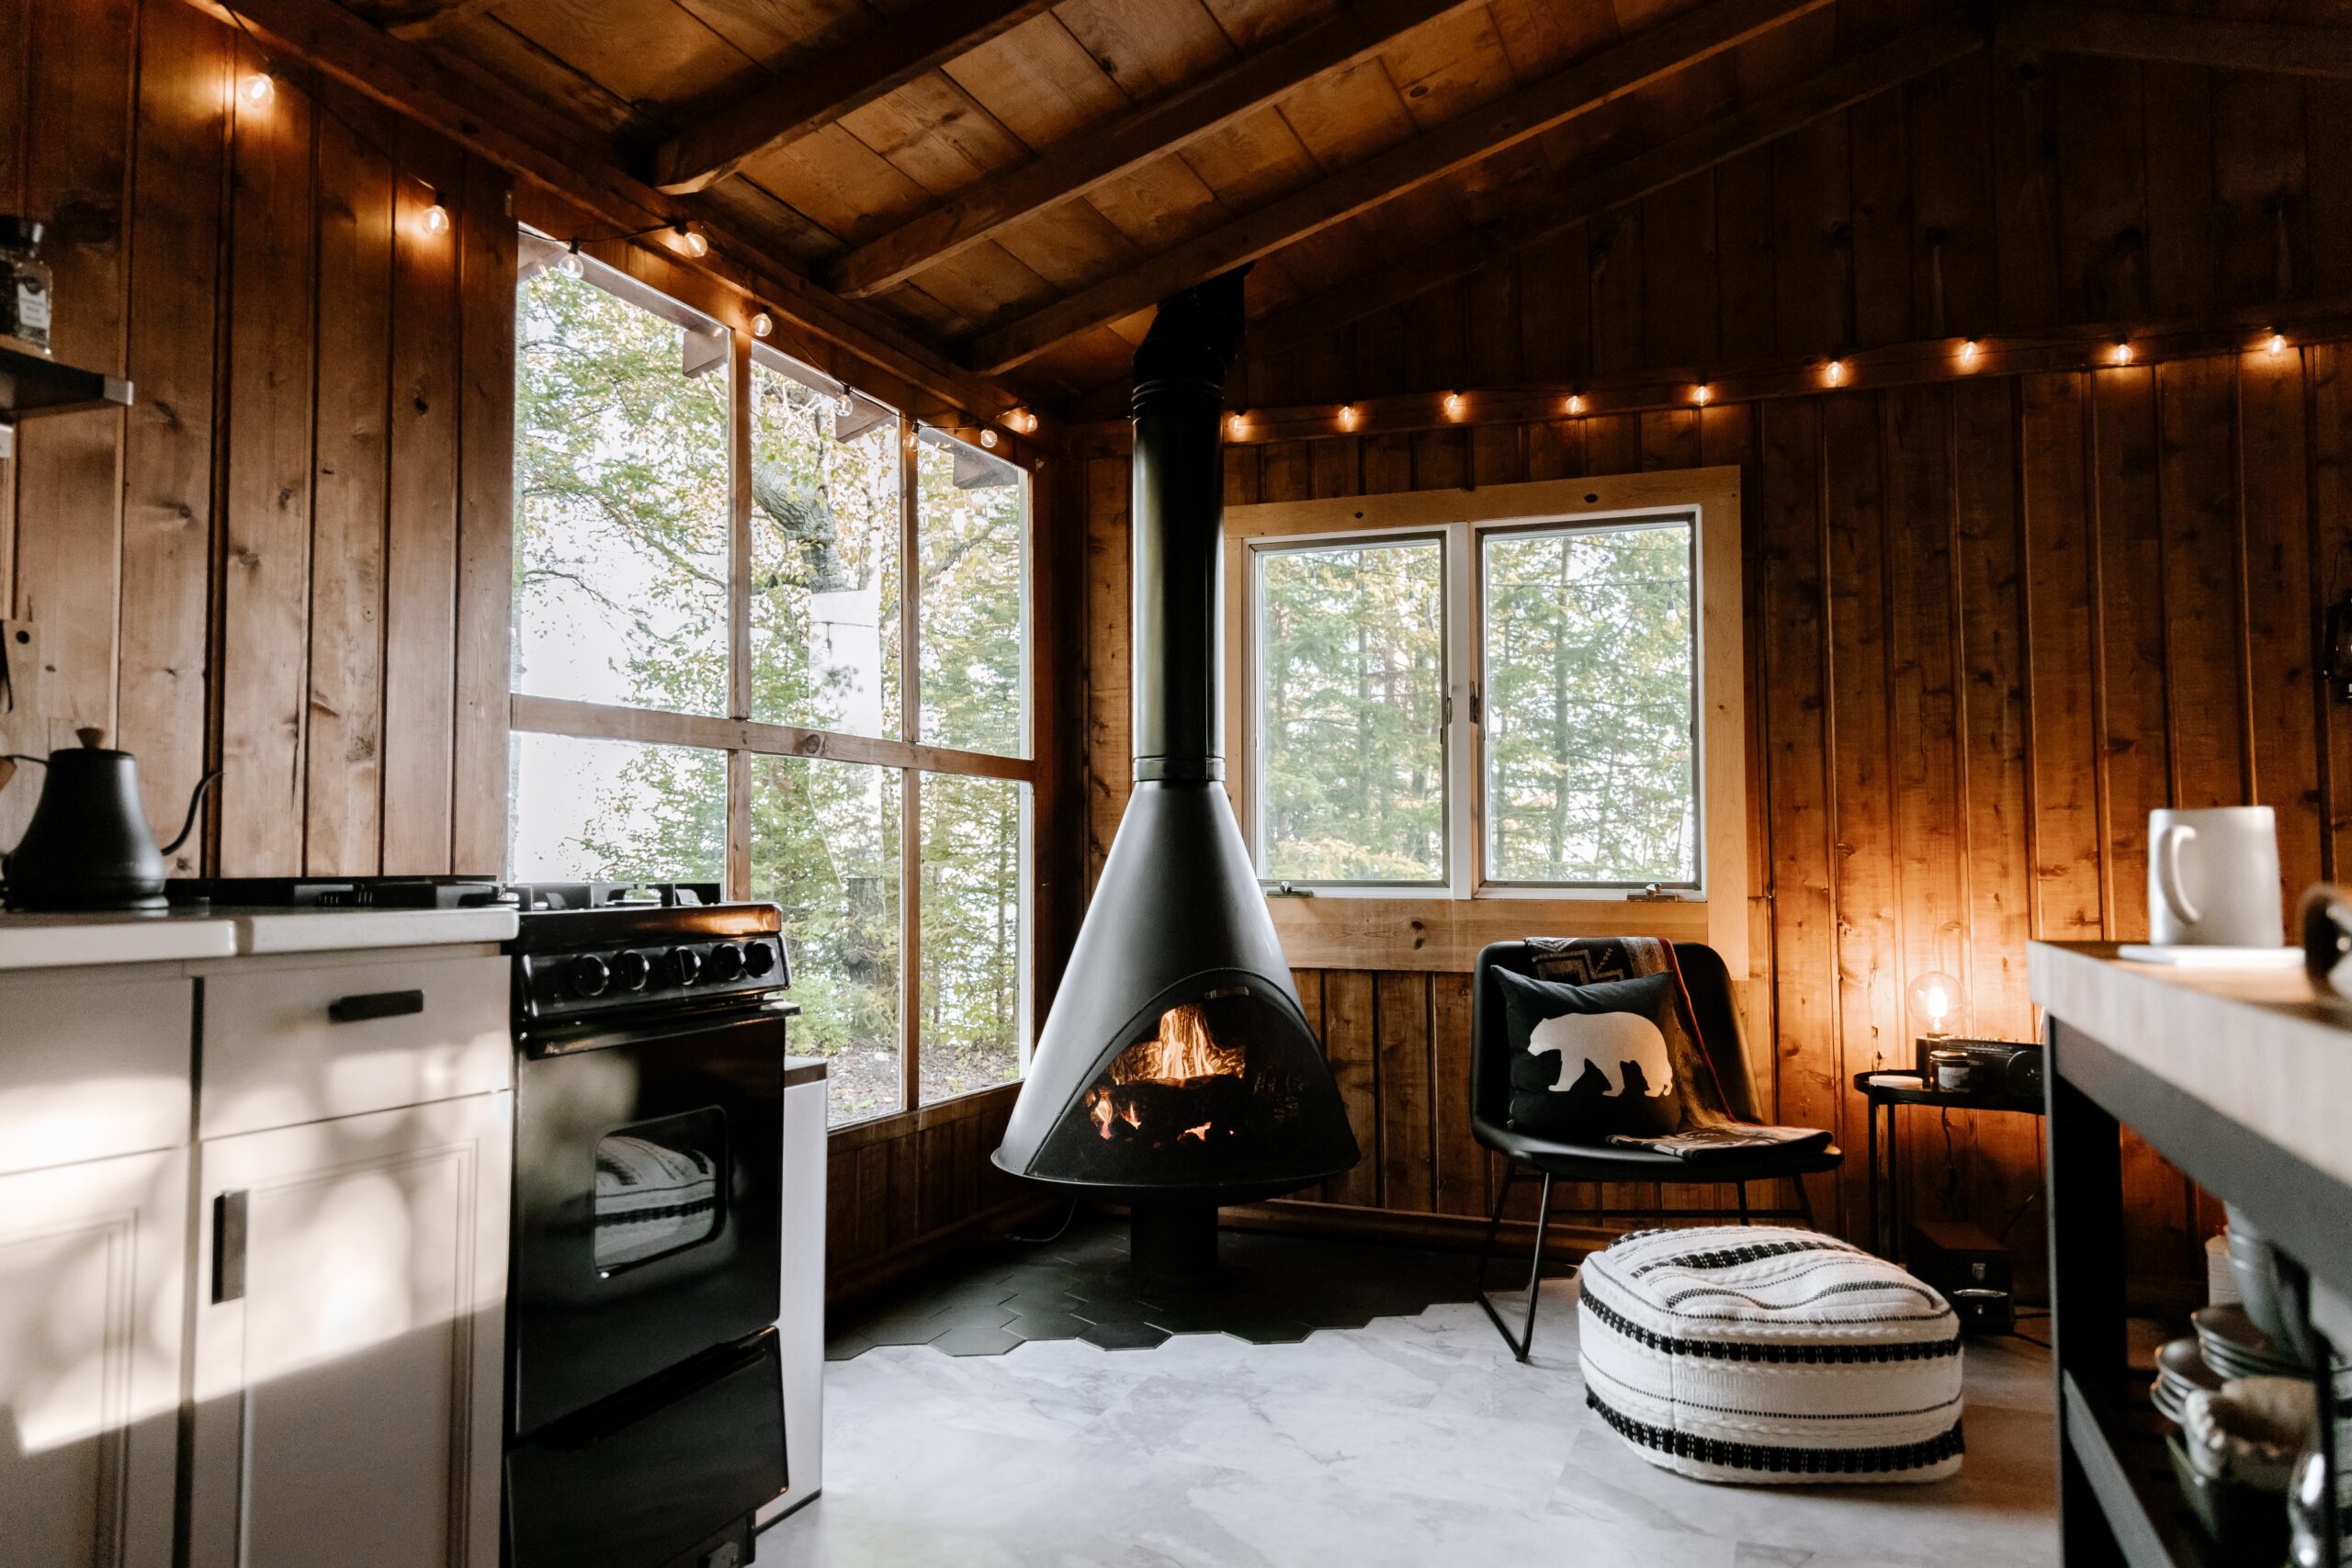 hans isaacson bQTVoJHrkO0 unsplash scaled How To Choose the Ideal Heating Solution For Your Home